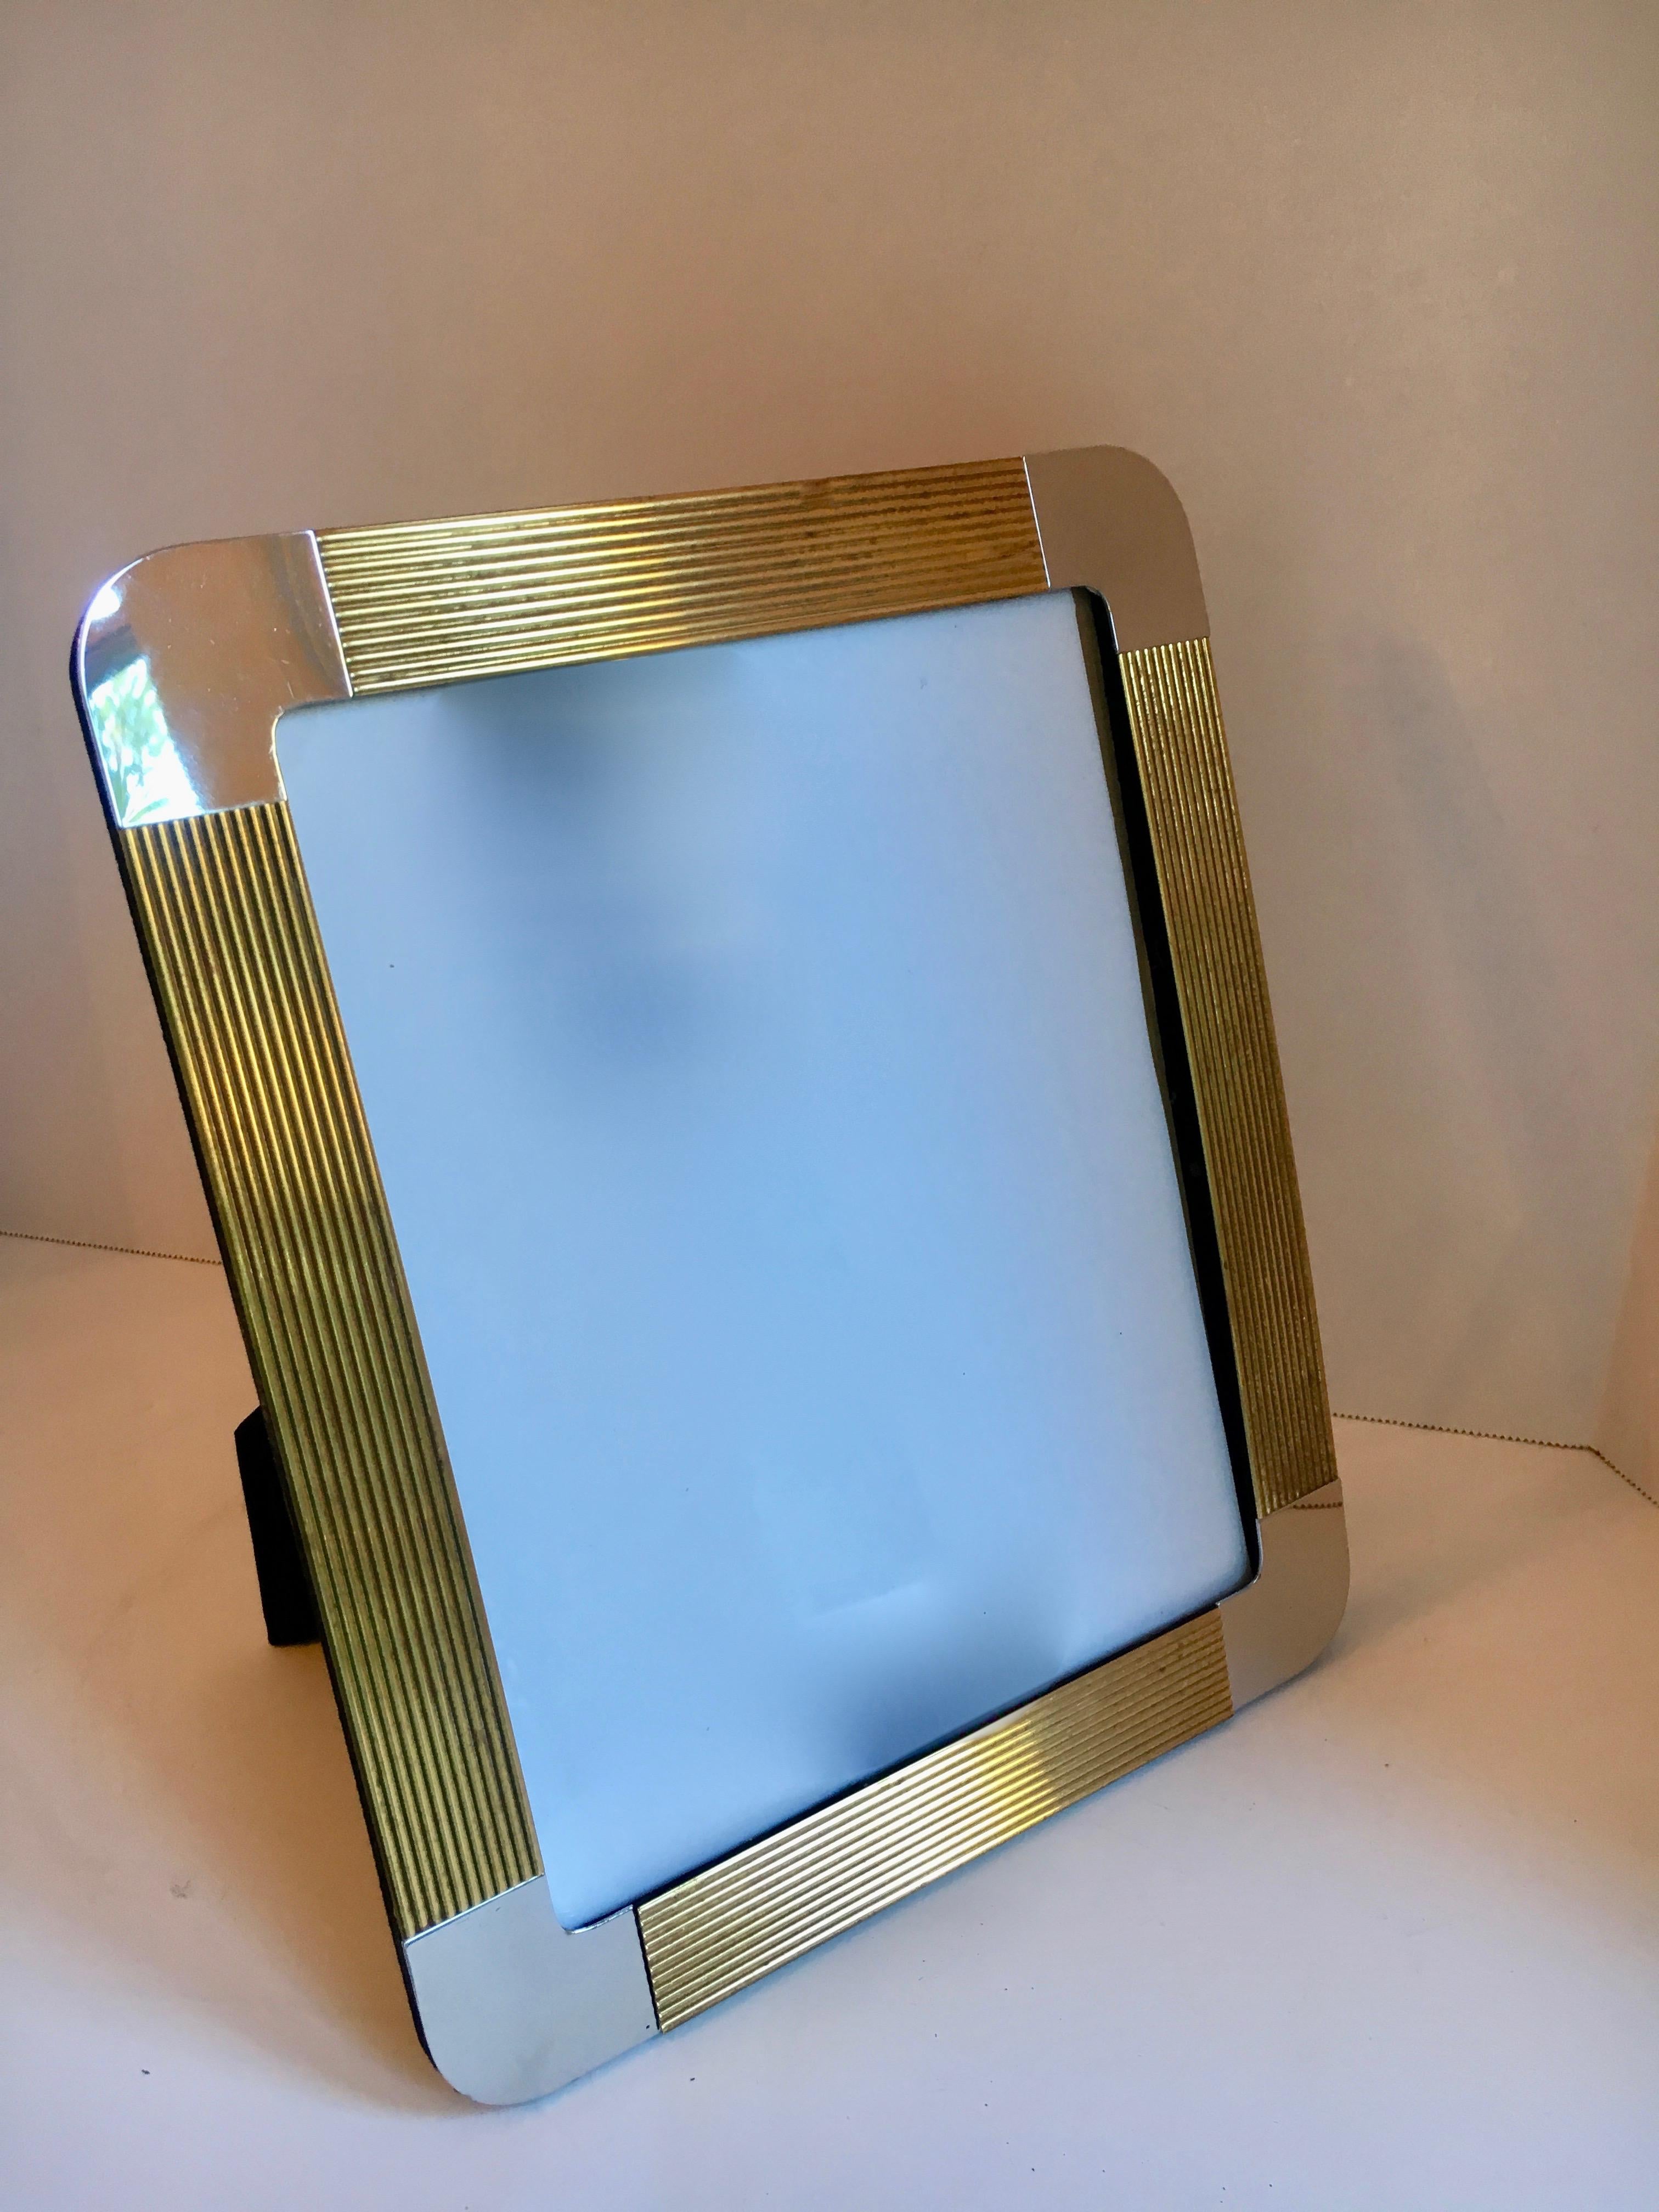 8 x 10 brass and chrome picture frame - holding memories in style. A stylish frame with black velvet reverse.